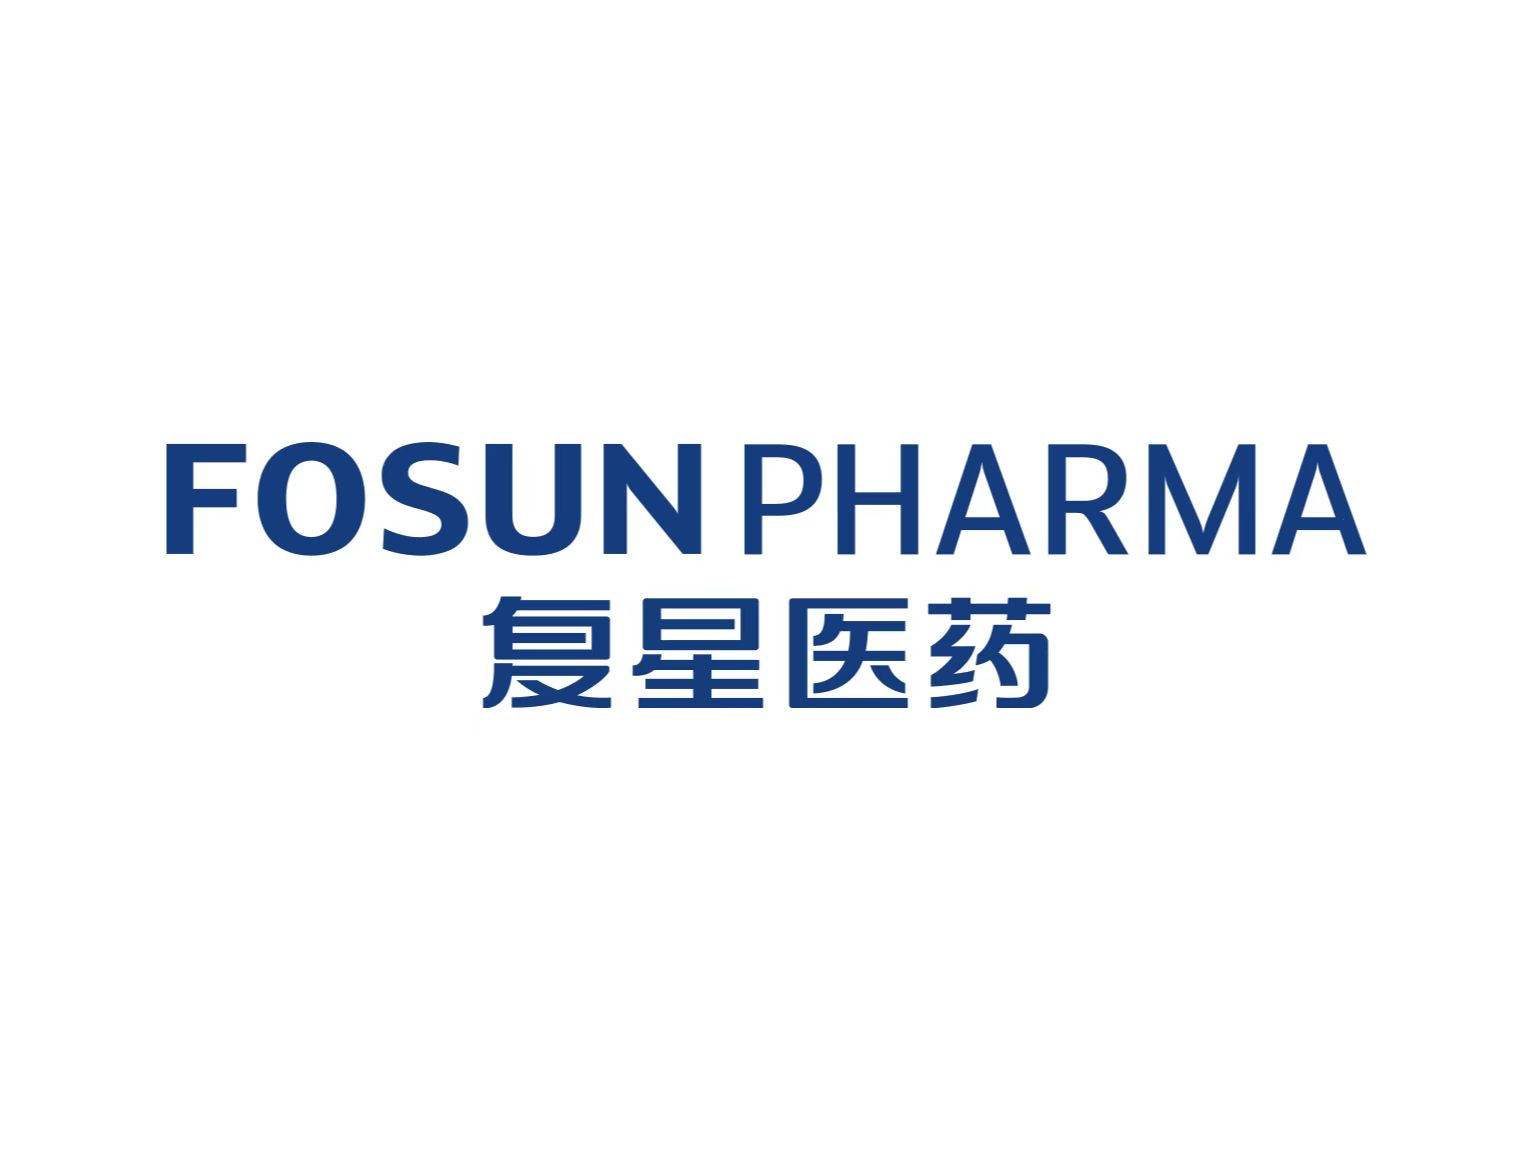 Fosun Foundation, Fosun Pharma and Genuine Biotech donated 100 million yuan of Azvudine to 180 counties in the Midwest